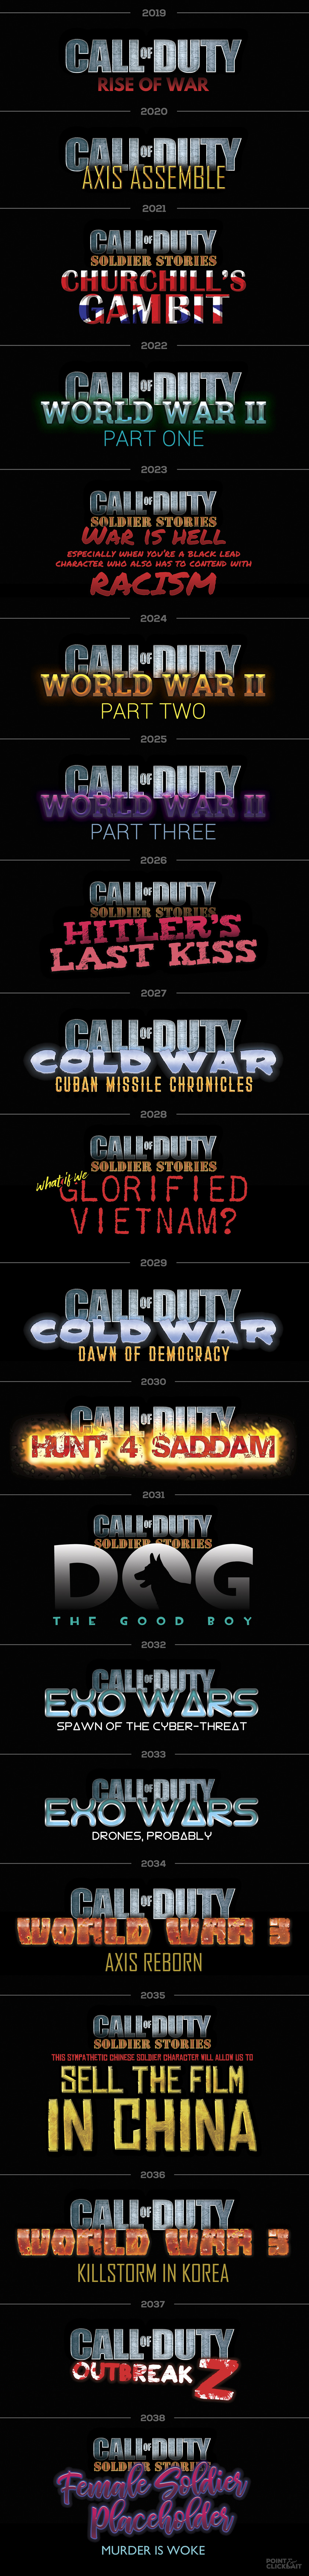 call of duty movie cinematic universe